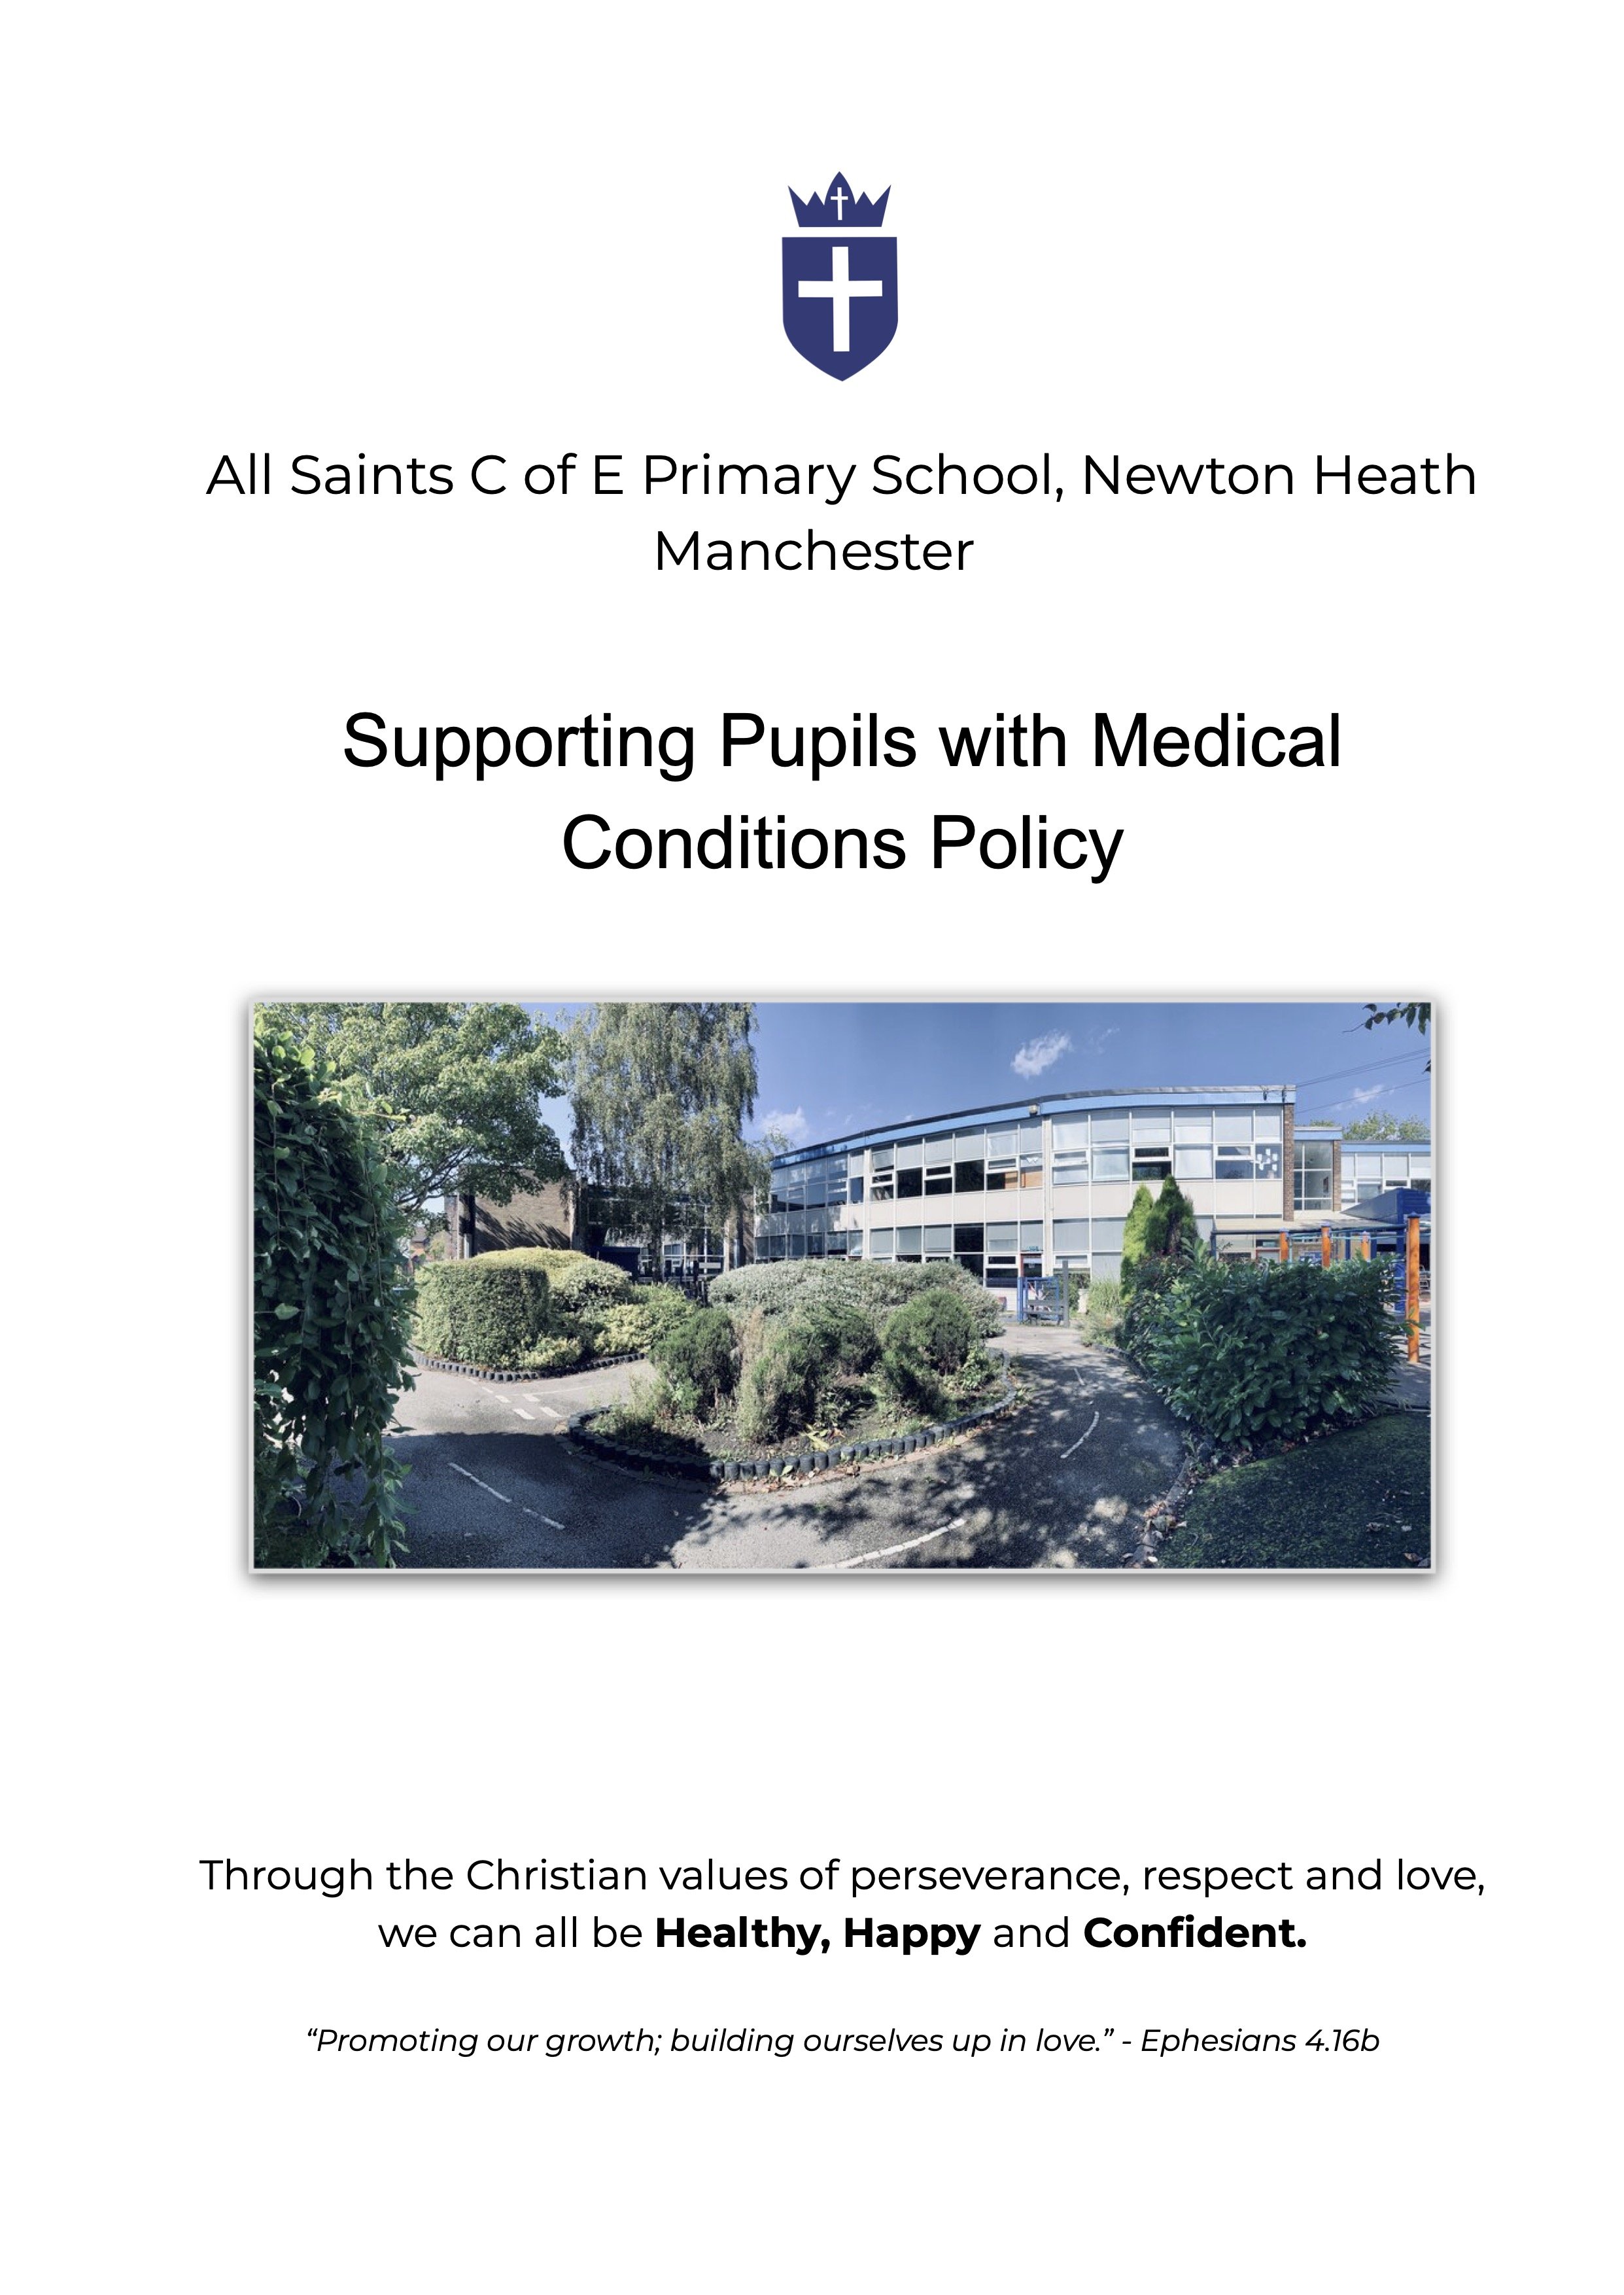 Supporting Pupils with Medical Conditions Policy.jpg